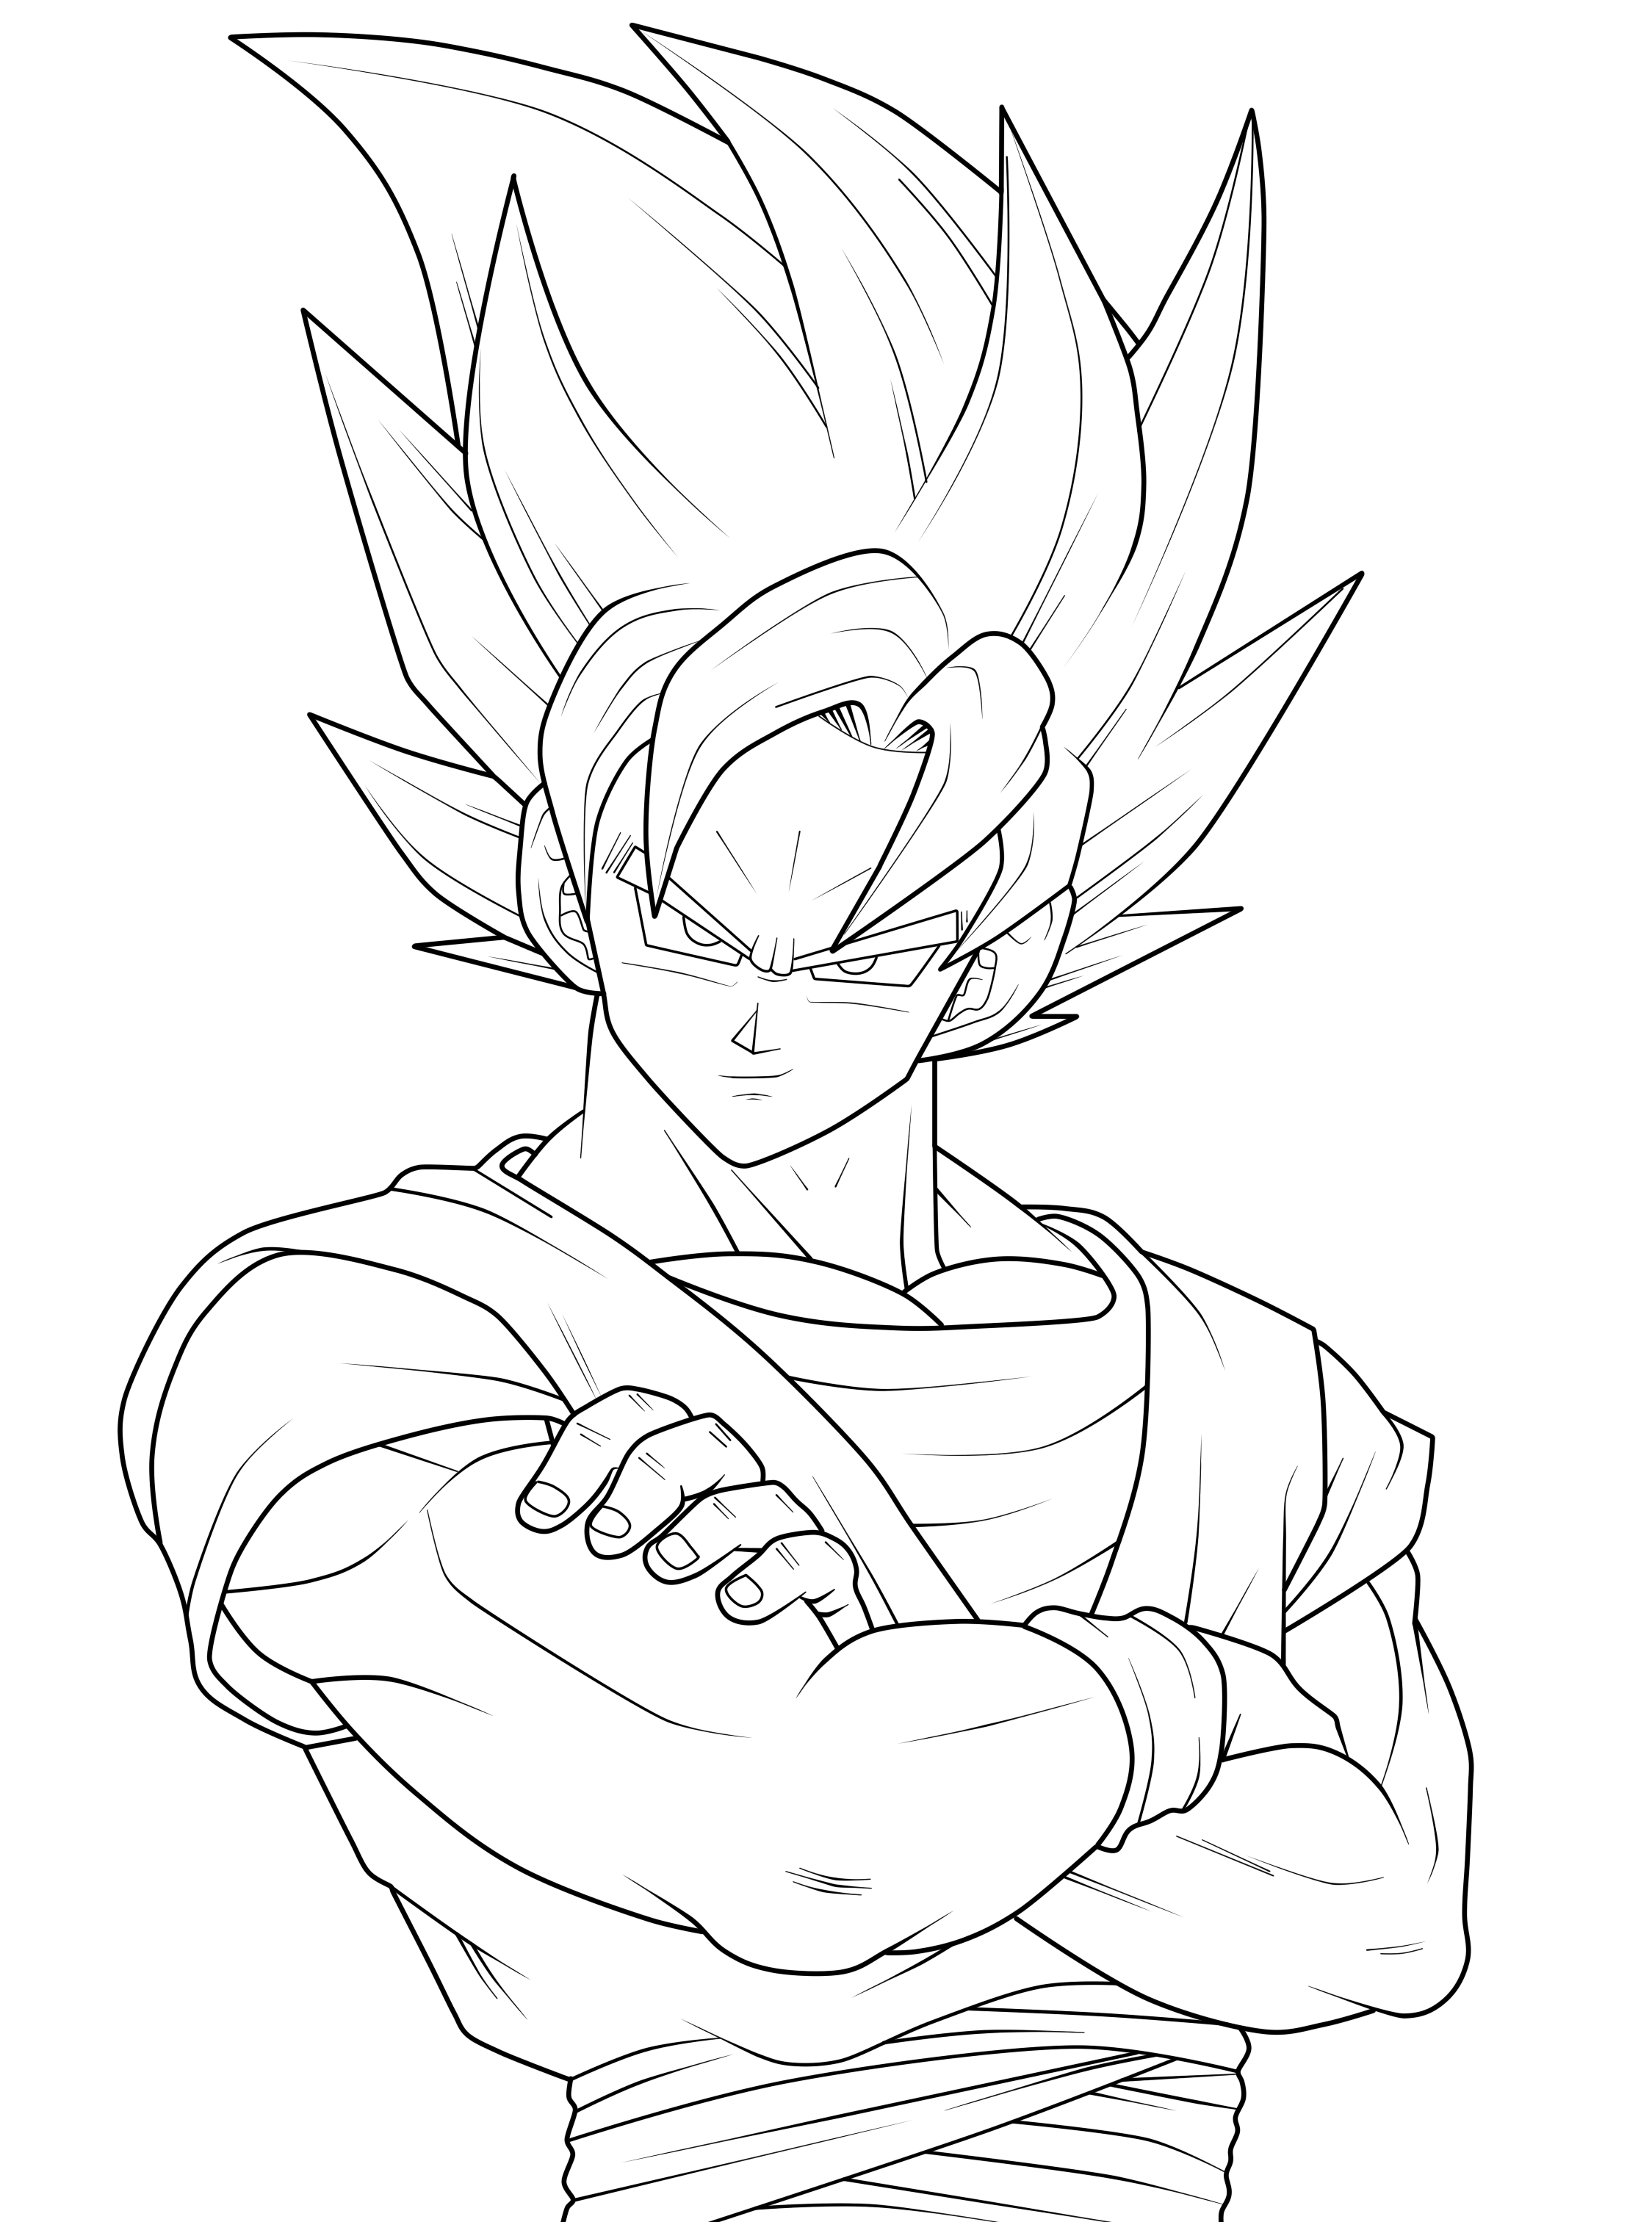 Ssj4 Goku Coloring Page - Coloring Home